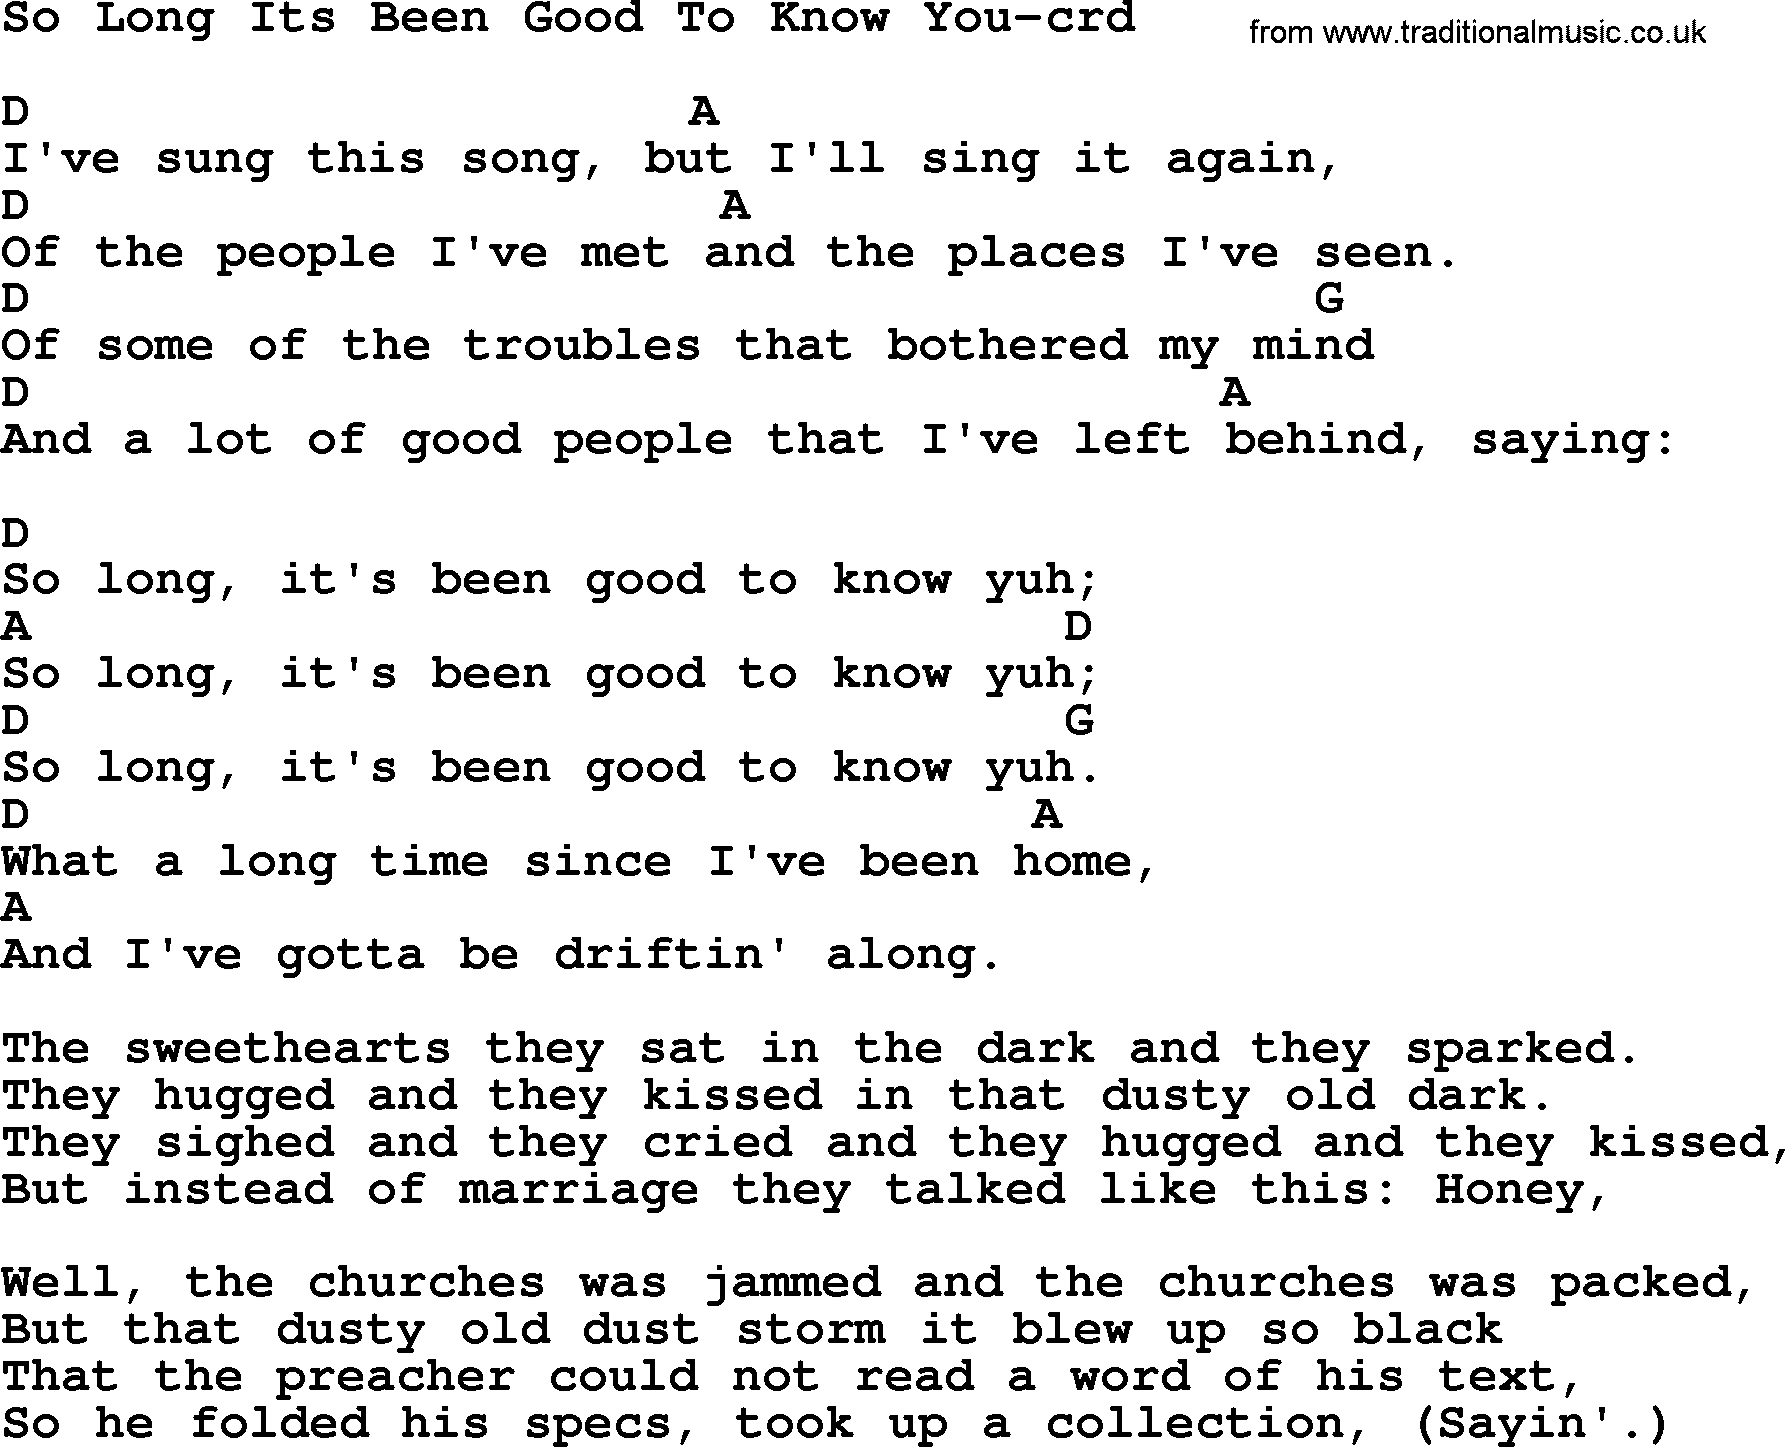 Woody Guthrie song So Long It's Been Good To Know You lyrics and chords